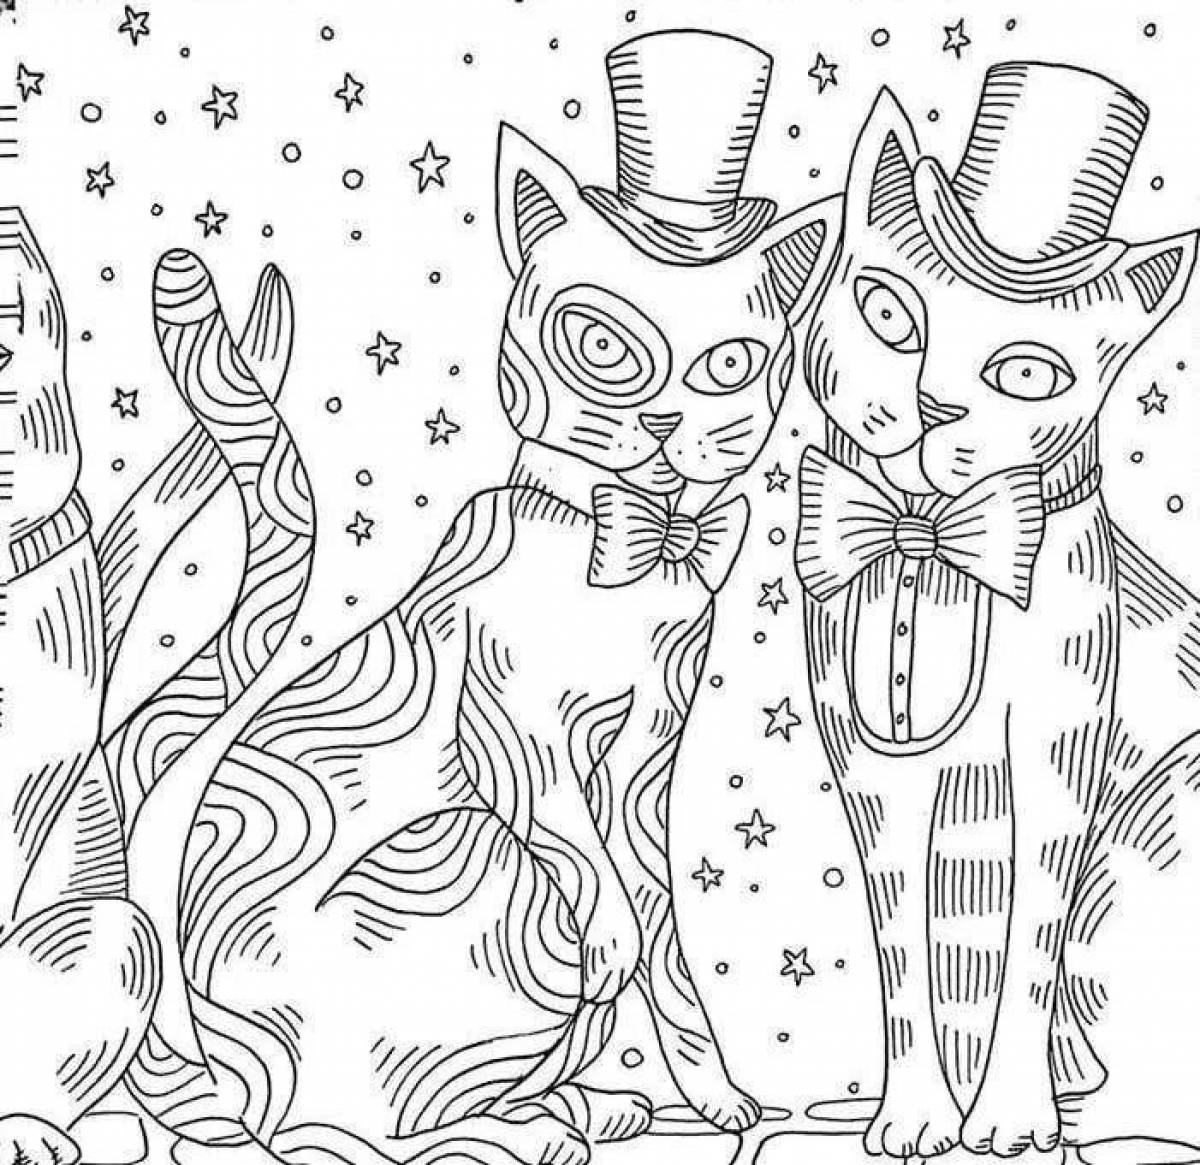 Shiny cats coloring pages for adults